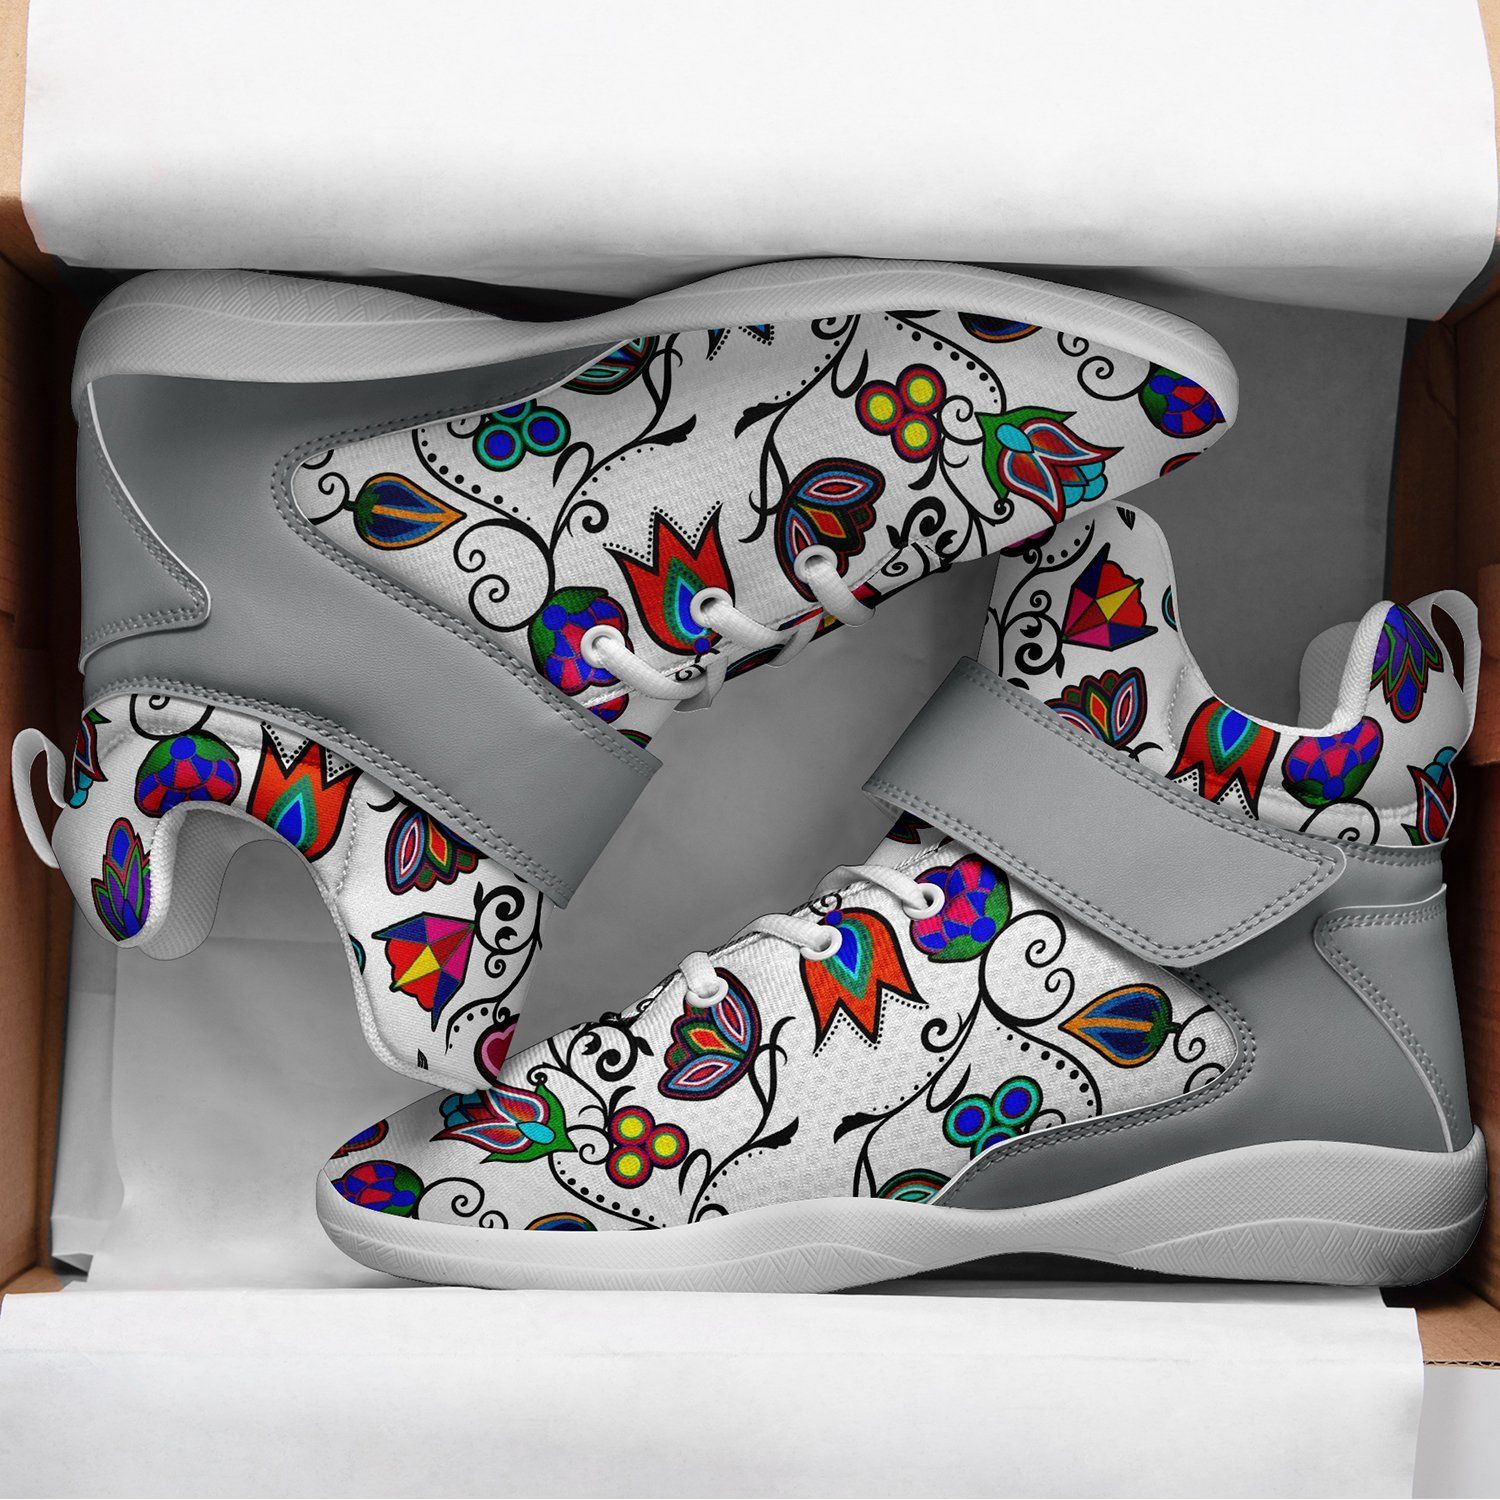 Indigenous Paisley White Ipottaa Basketball / Sport High Top Shoes - White Sole 49 Dzine 